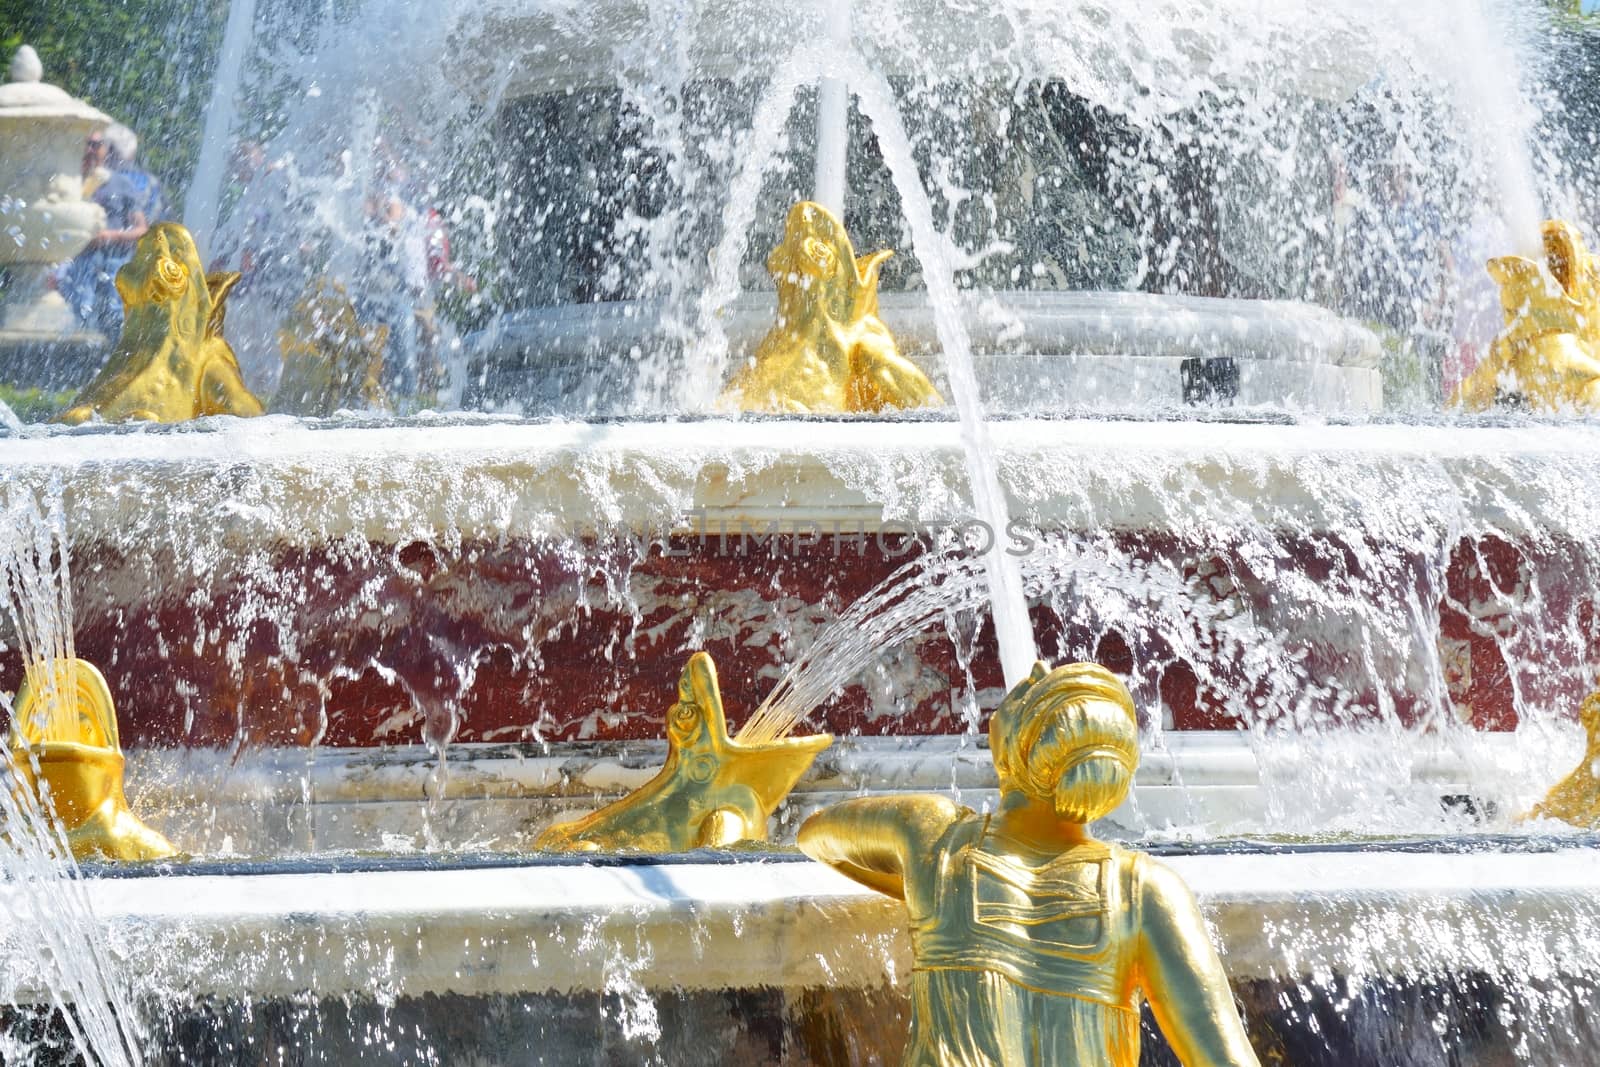 Detail of ornate gold fountain